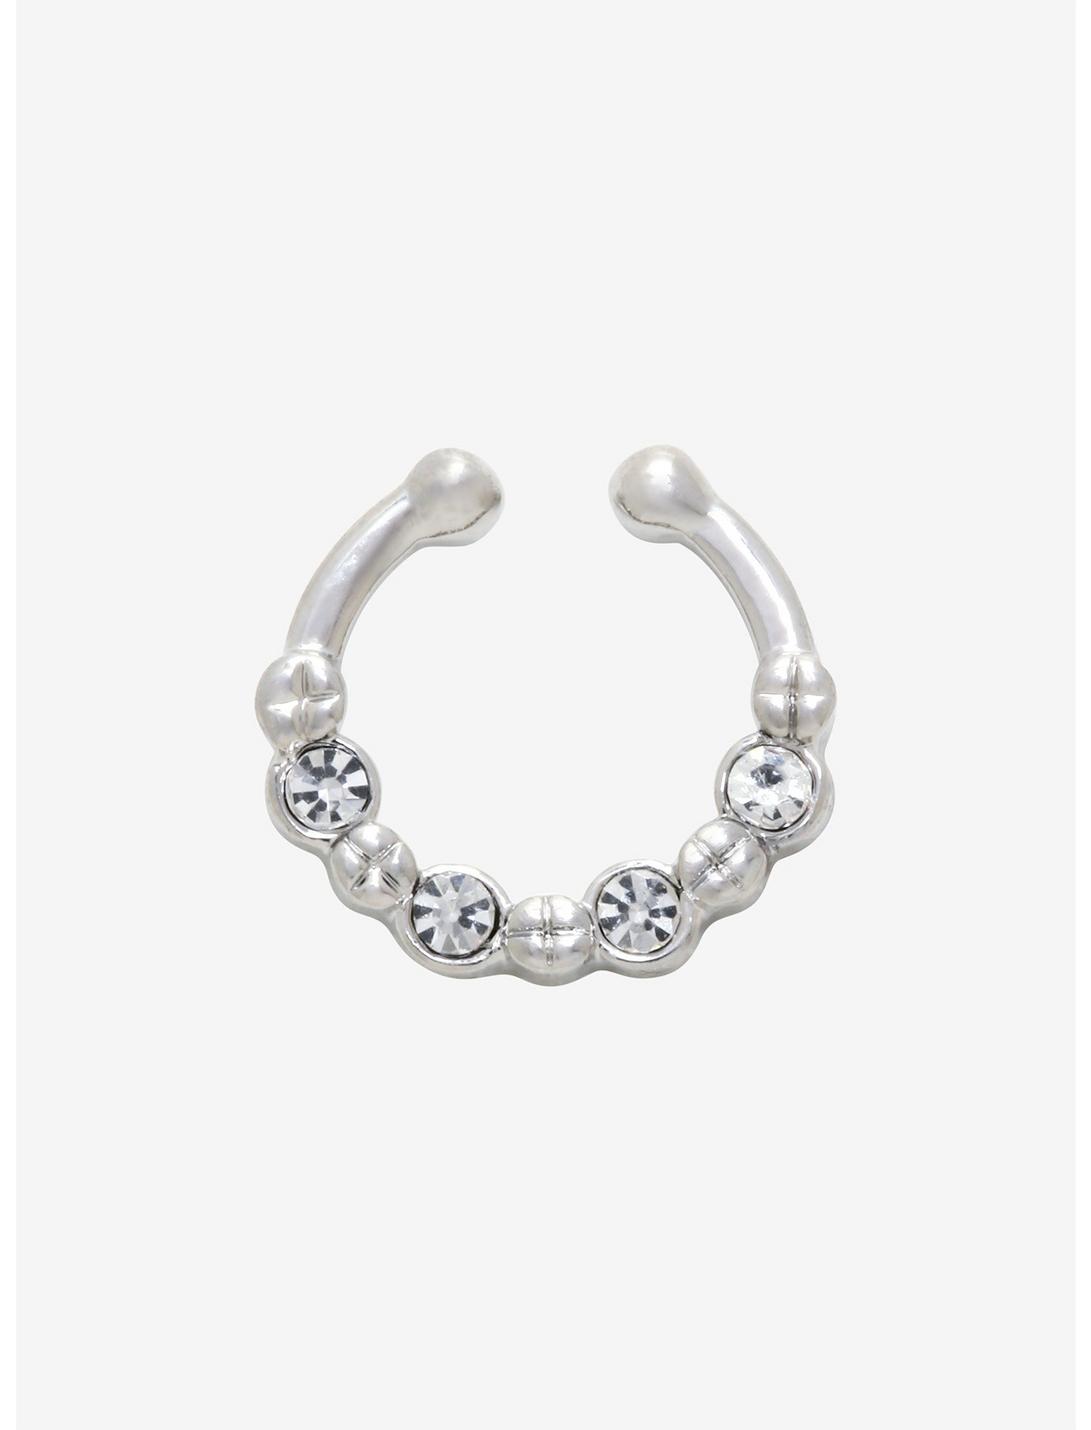 Silver Clear CZ Faux Nose Hoop, , hi-res